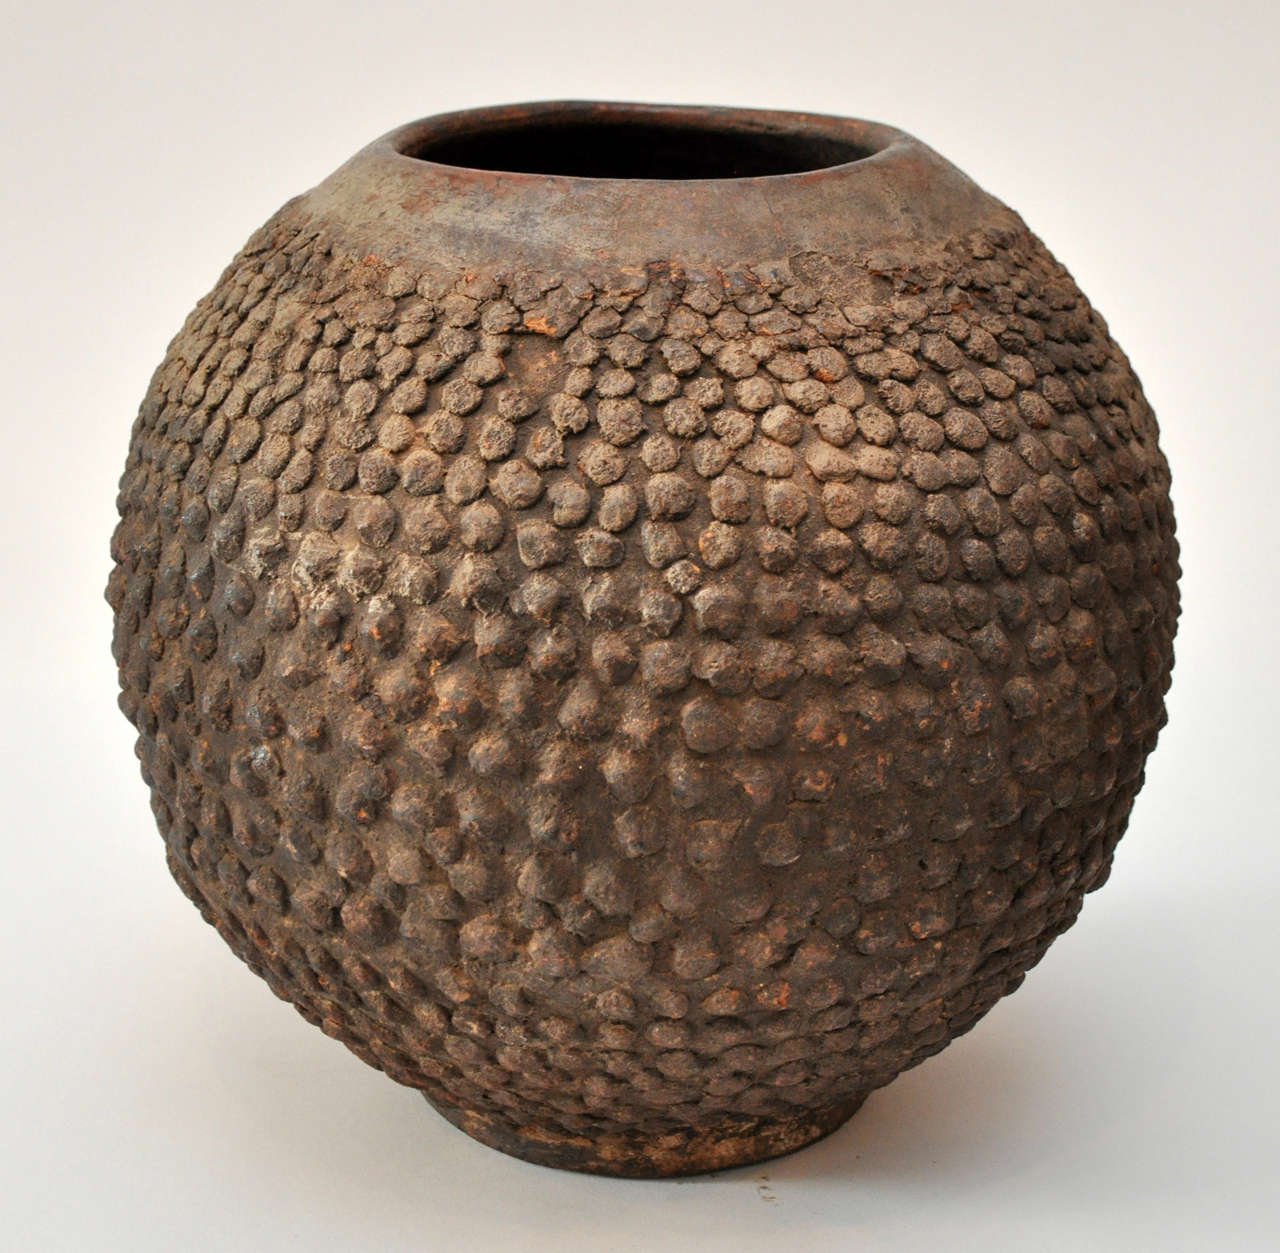 Vessel created by the Lobi People of Burking Faso, Mali Africa<br />
Terracotta warted vessel.